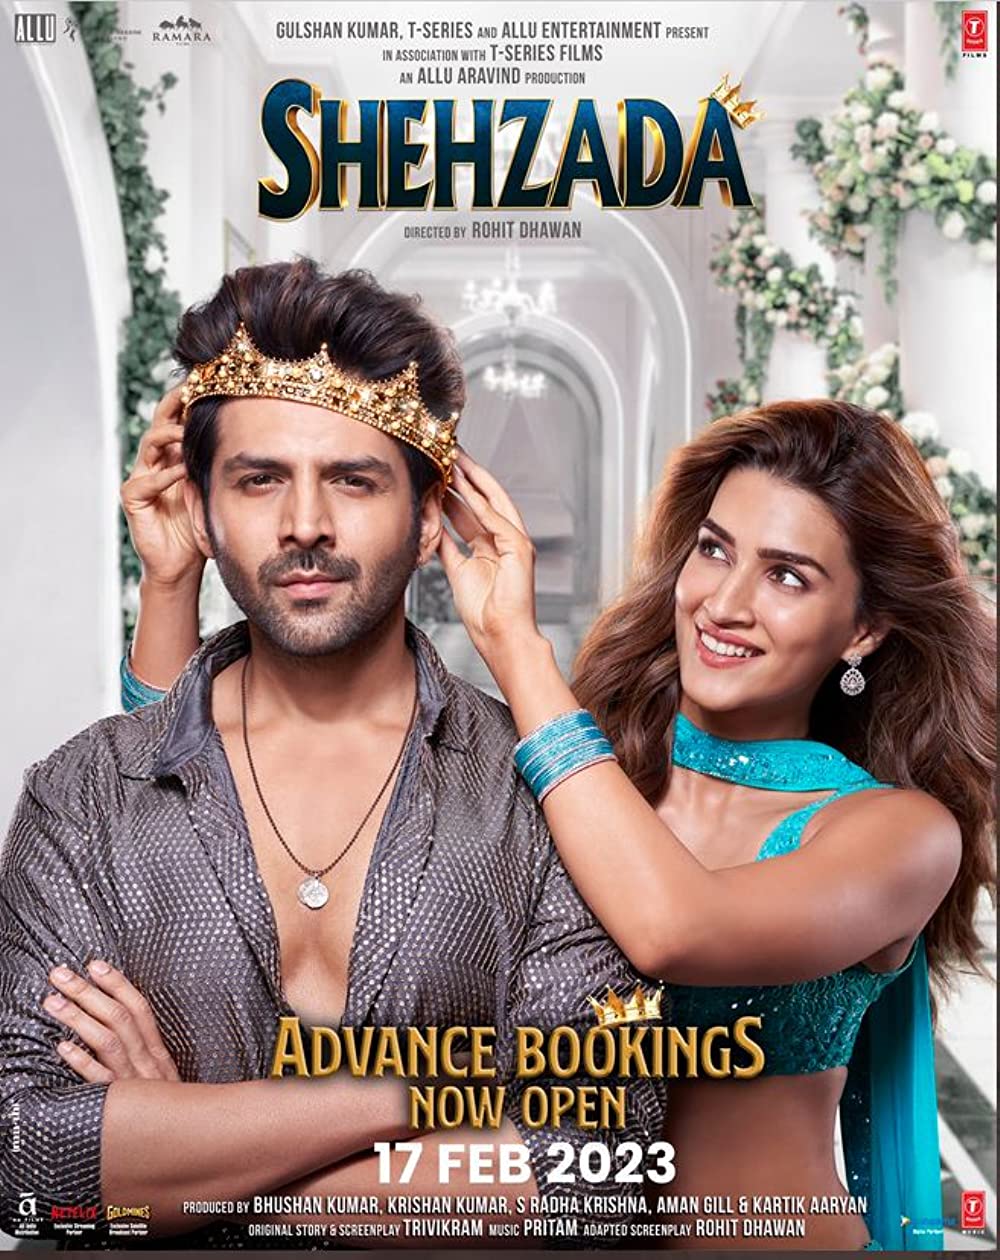 Shehzada Movie (2023) Cast, Release Date, Story, Budget, Collection, Poster, Trailer, Review